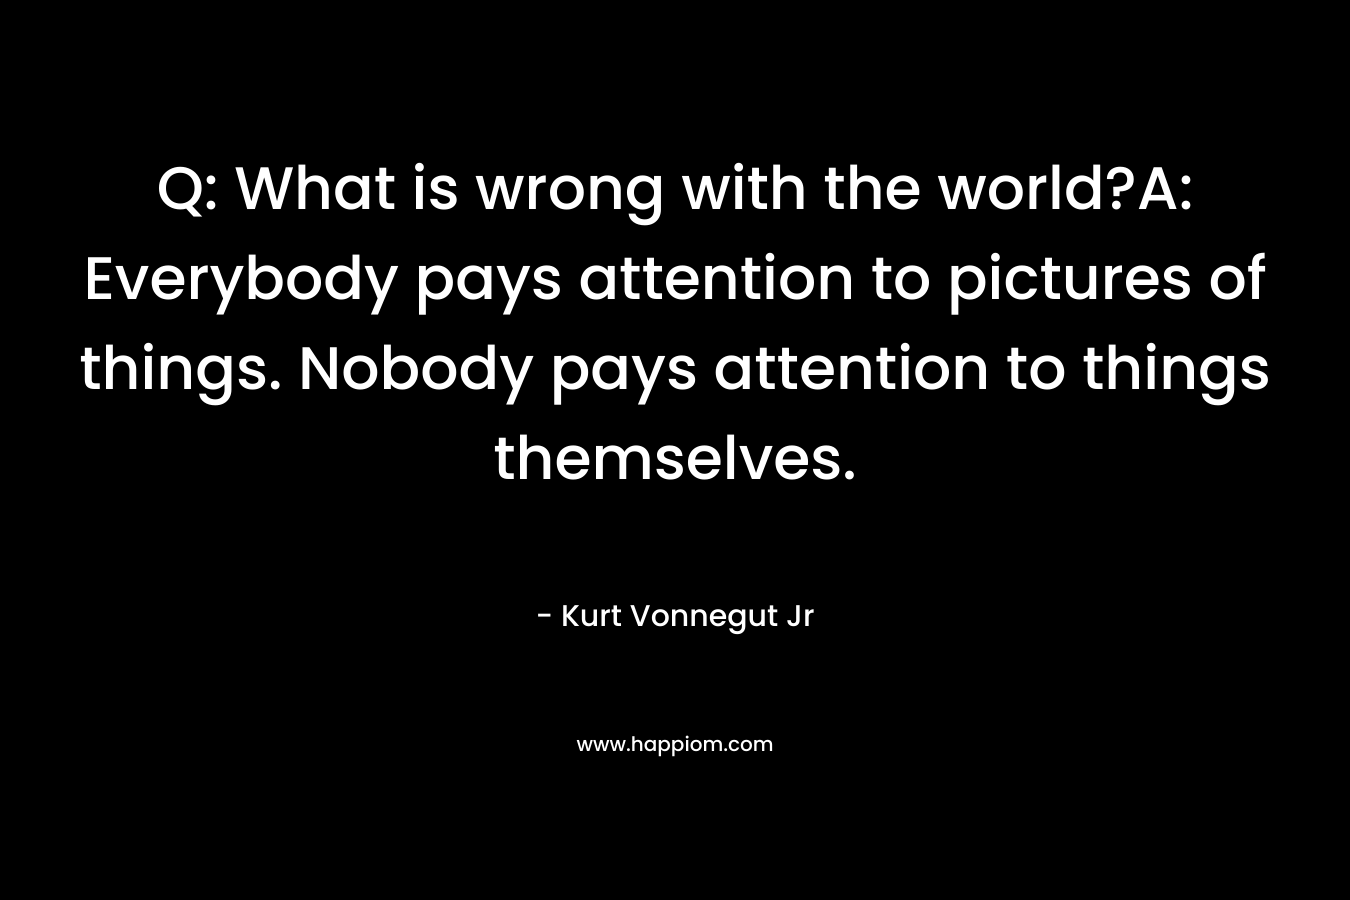 Q: What is wrong with the world?A: Everybody pays attention to pictures of things. Nobody pays attention to things themselves. – Kurt Vonnegut Jr